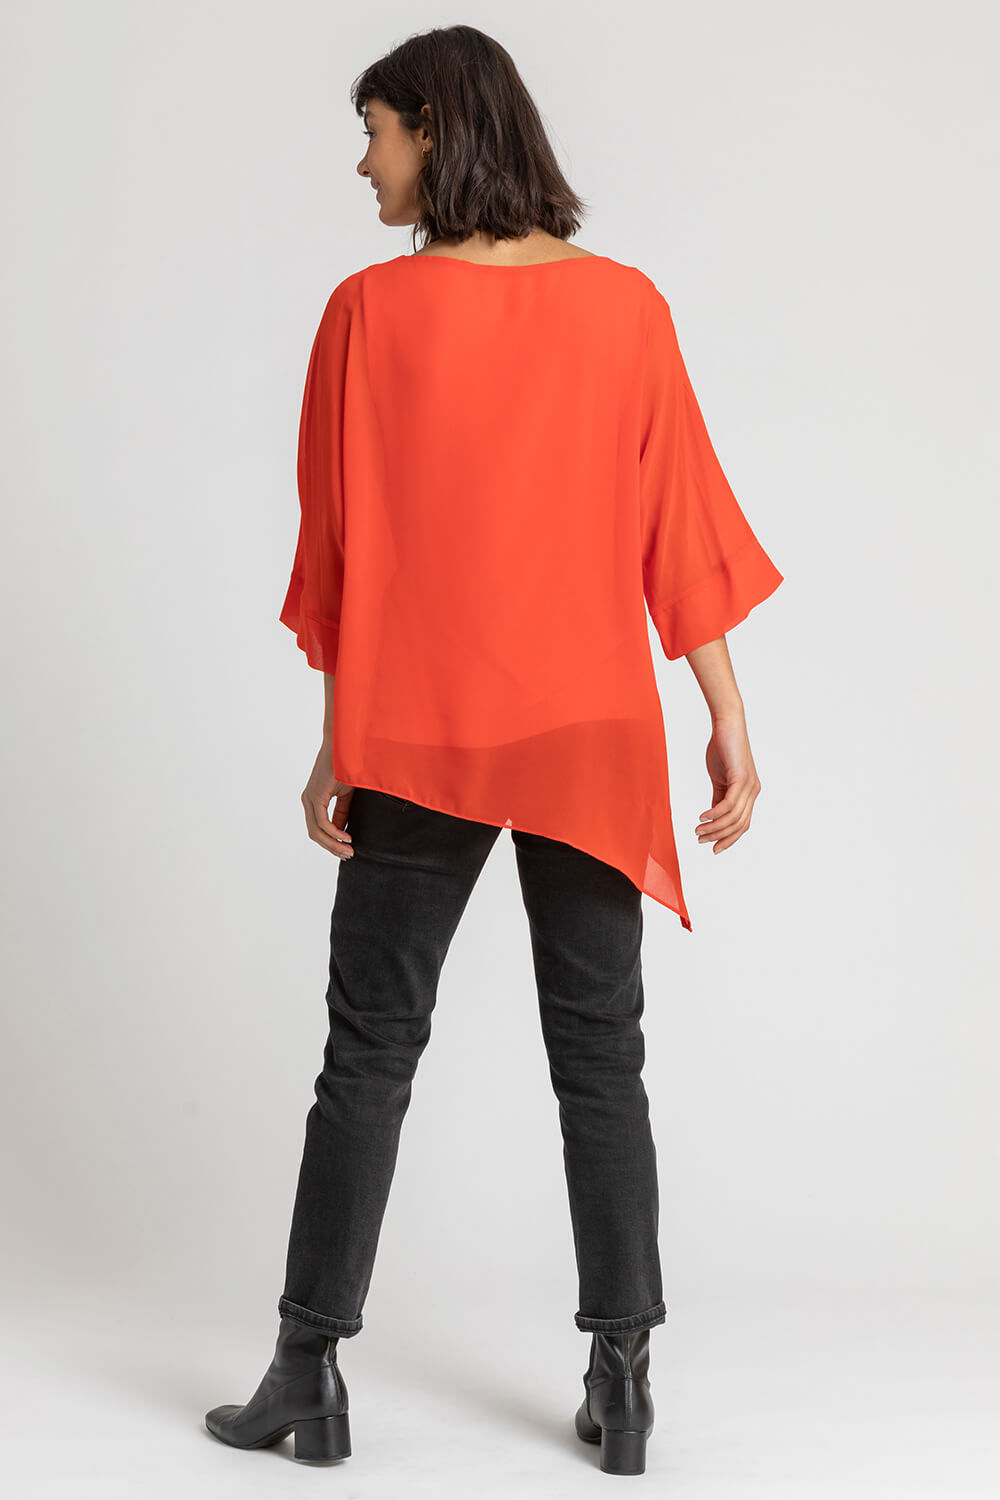 Red Asymmetric Chiffon Overlay Top, Image 2 of 4